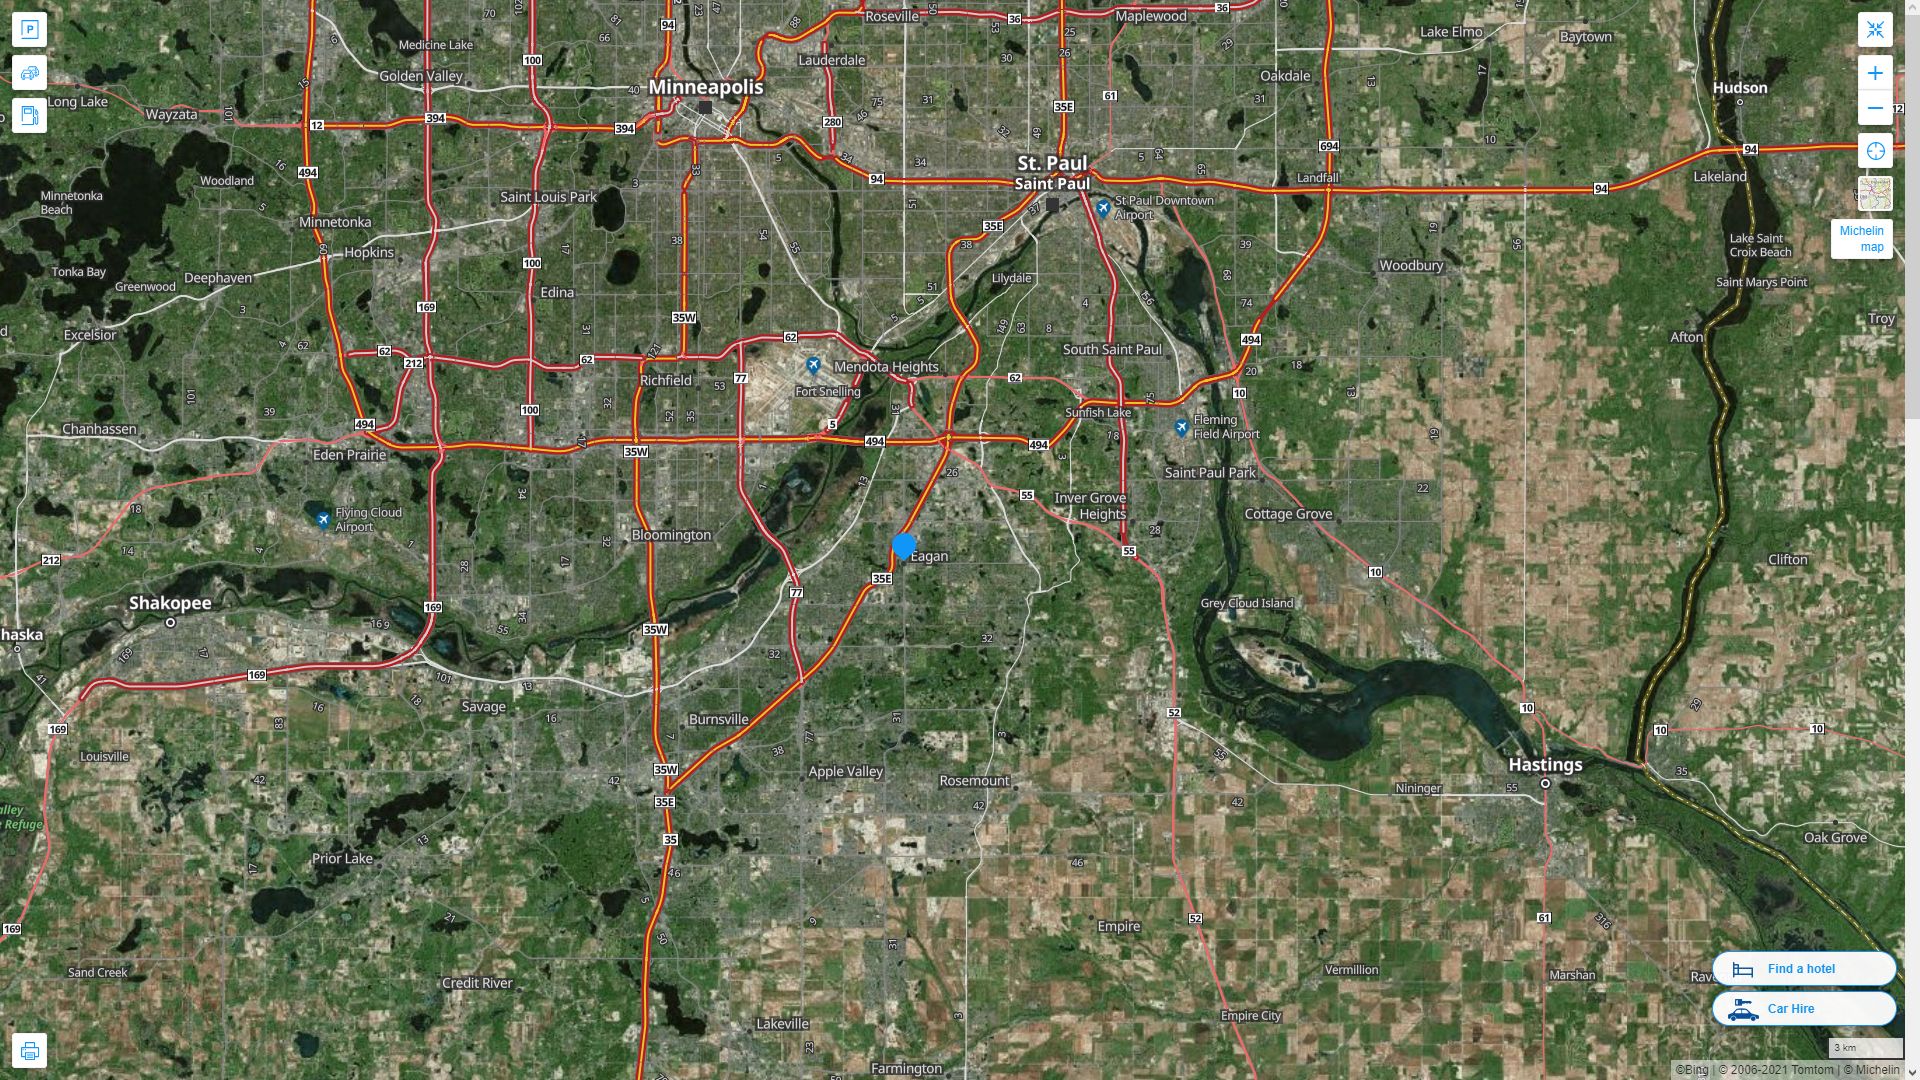 Eagan Minnesota Highway and Road Map with Satellite View